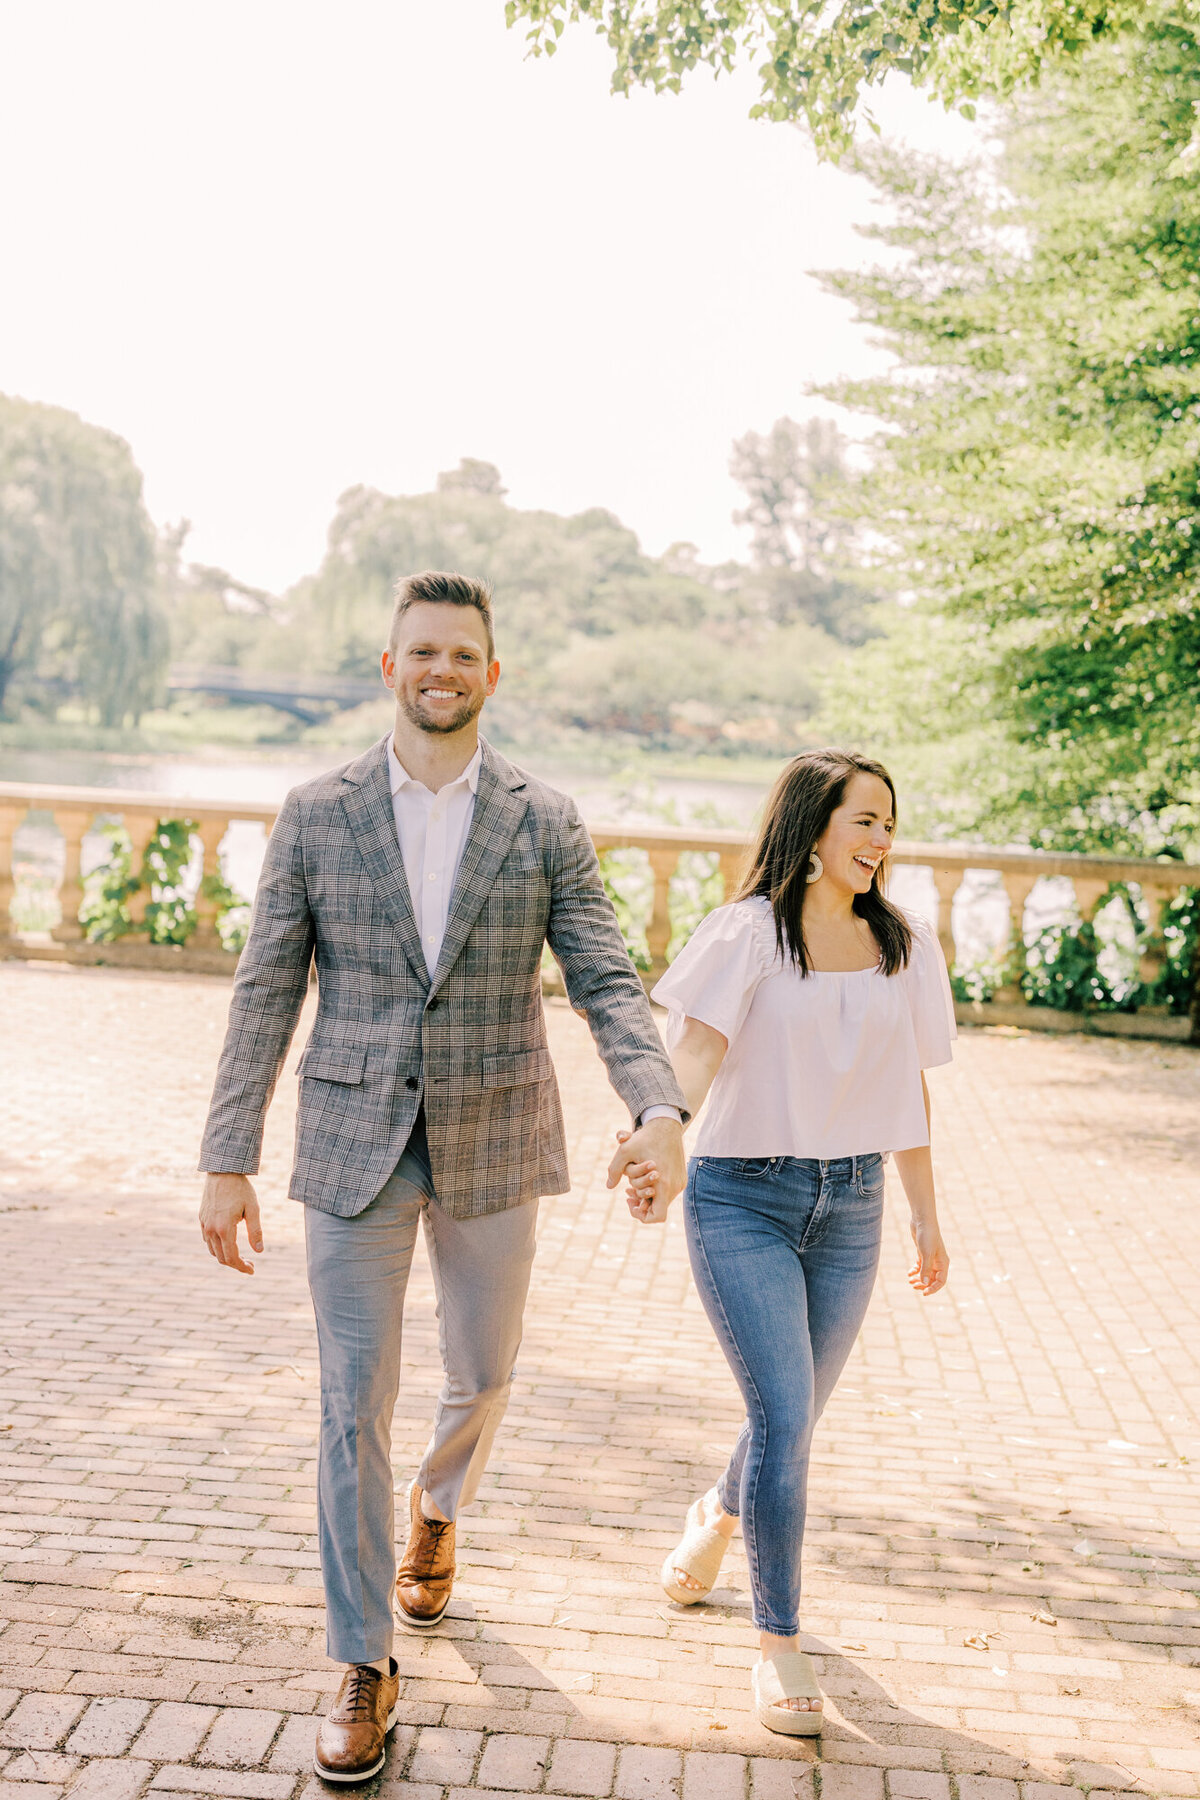 An engagement photo at the Chicago Botanic Garden